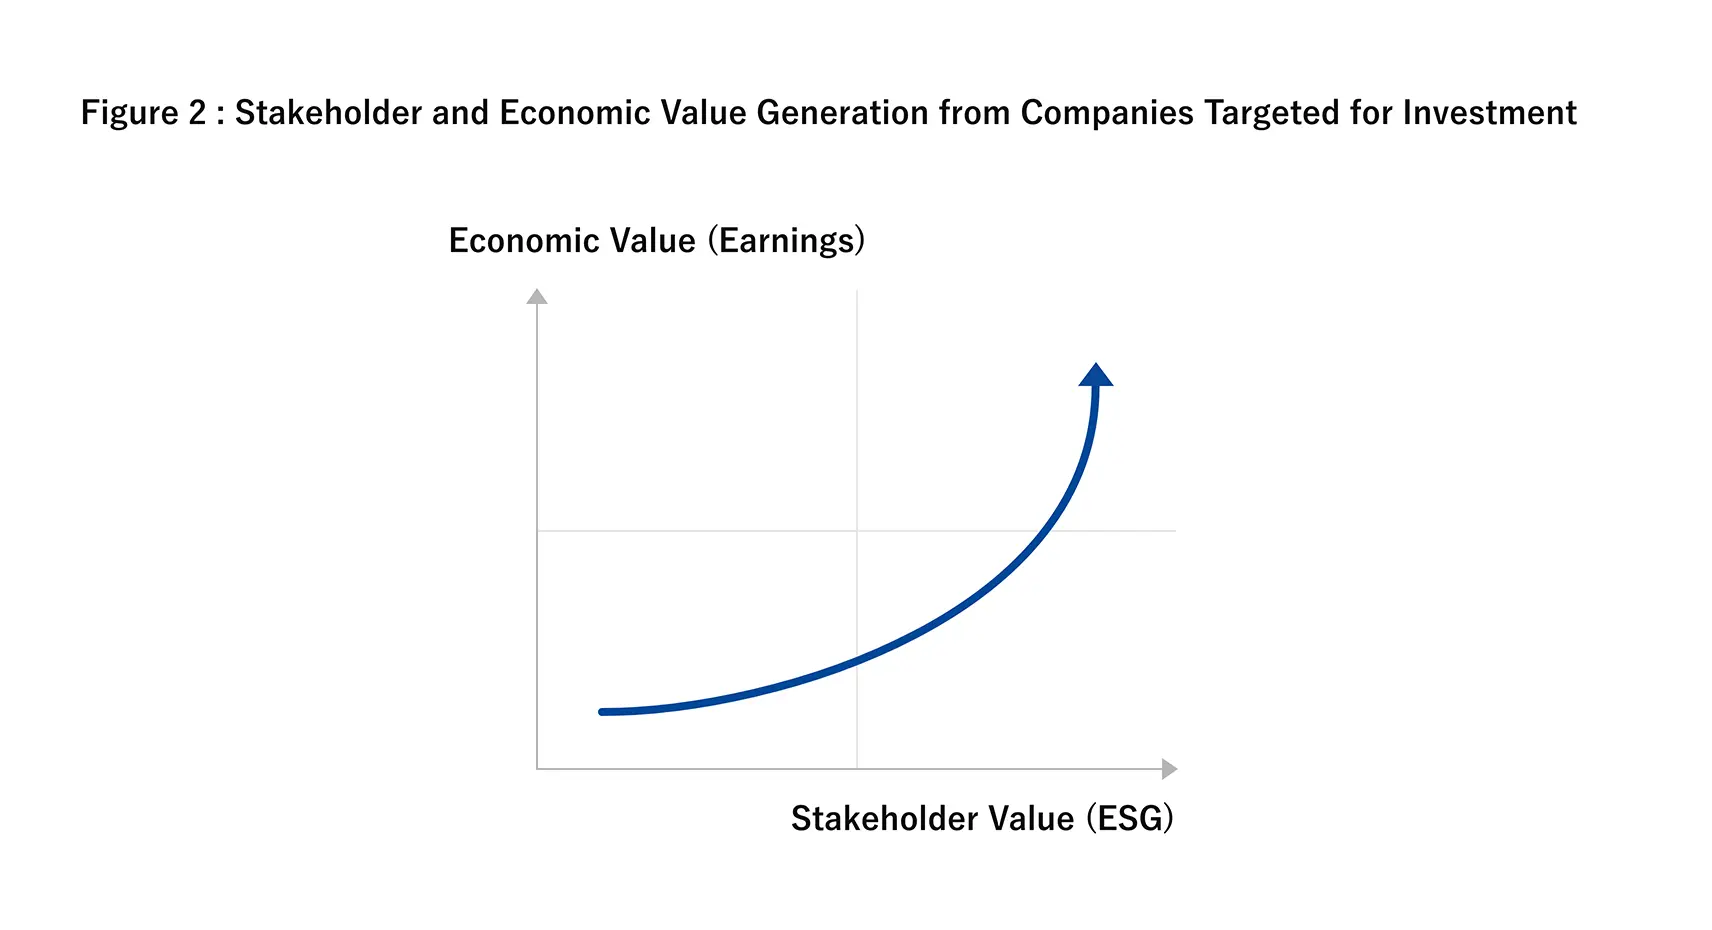 Figure 2: Stakeholder and Economic Value Generation from Companies Targeted for Investment